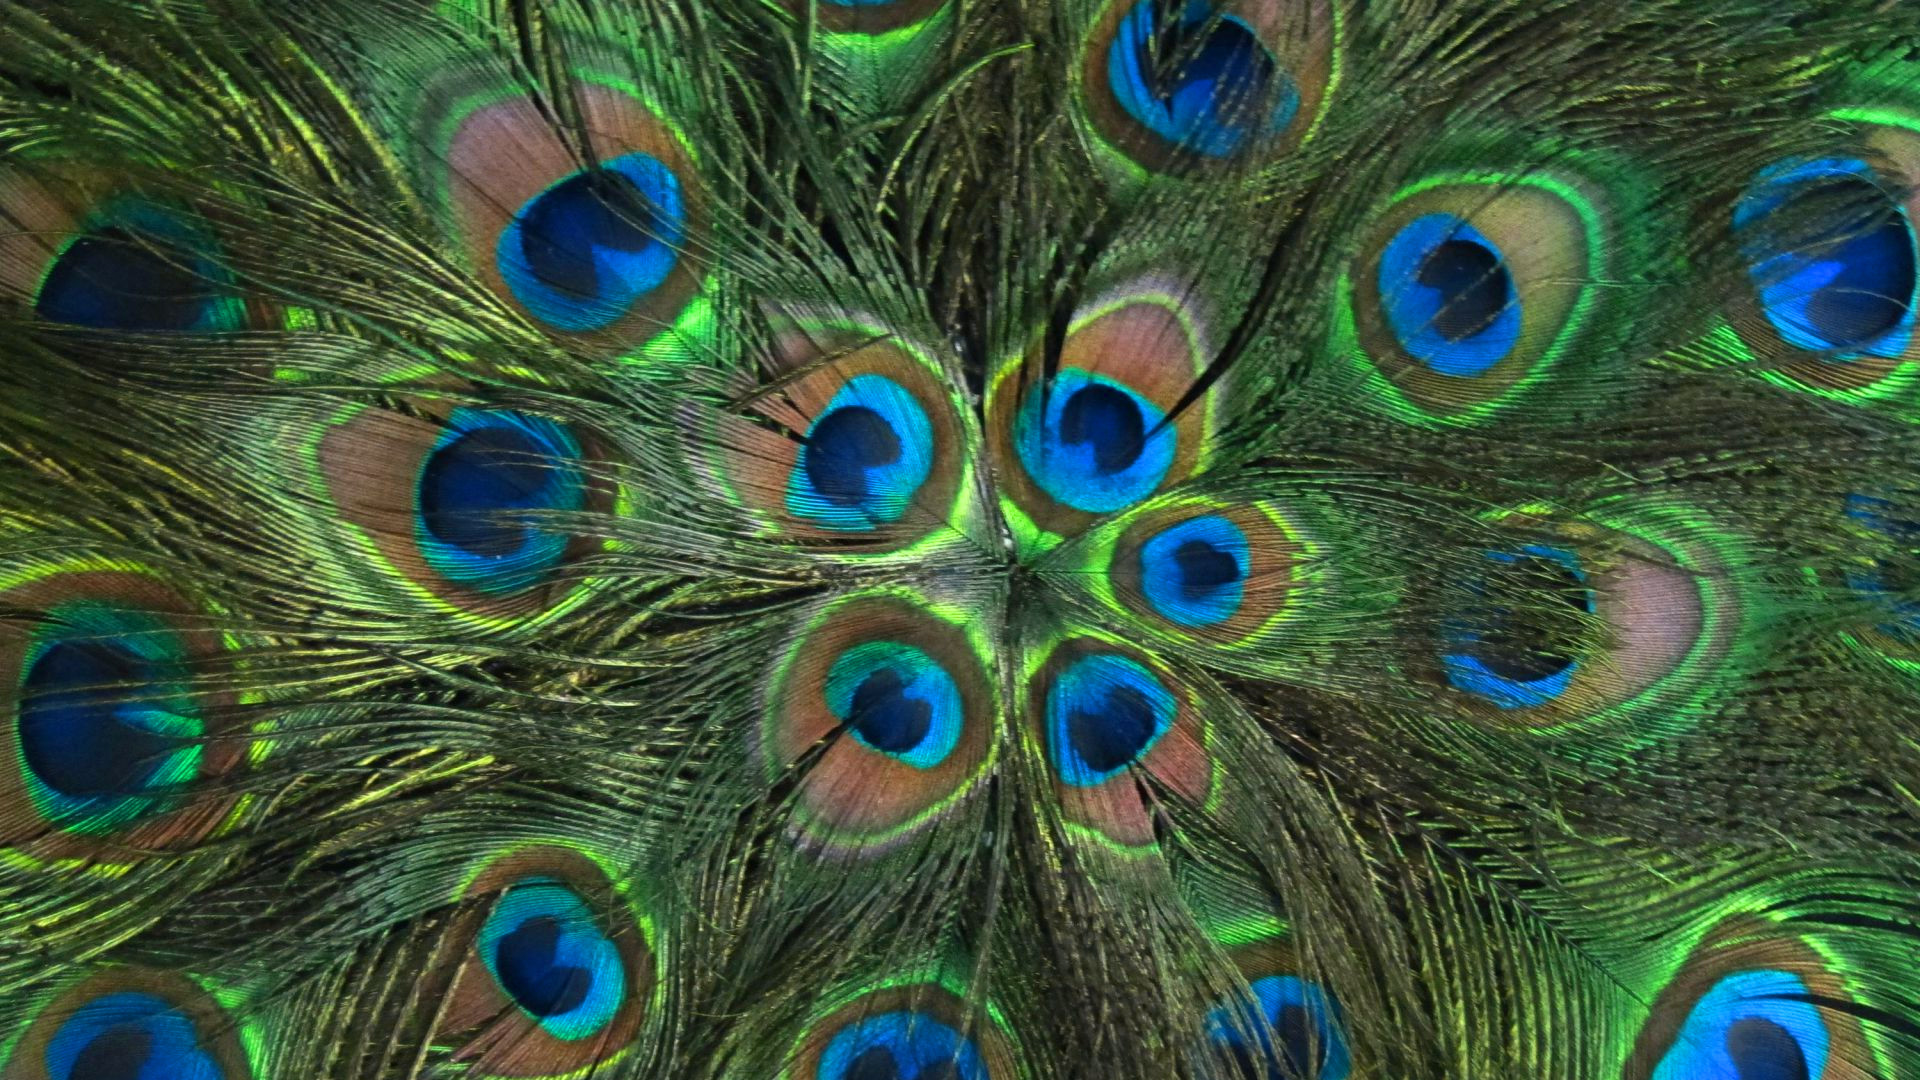 1920x1080 ... Wallpapers Of Peacock Feathers HD 2015 - Wallpaper Gallery ...